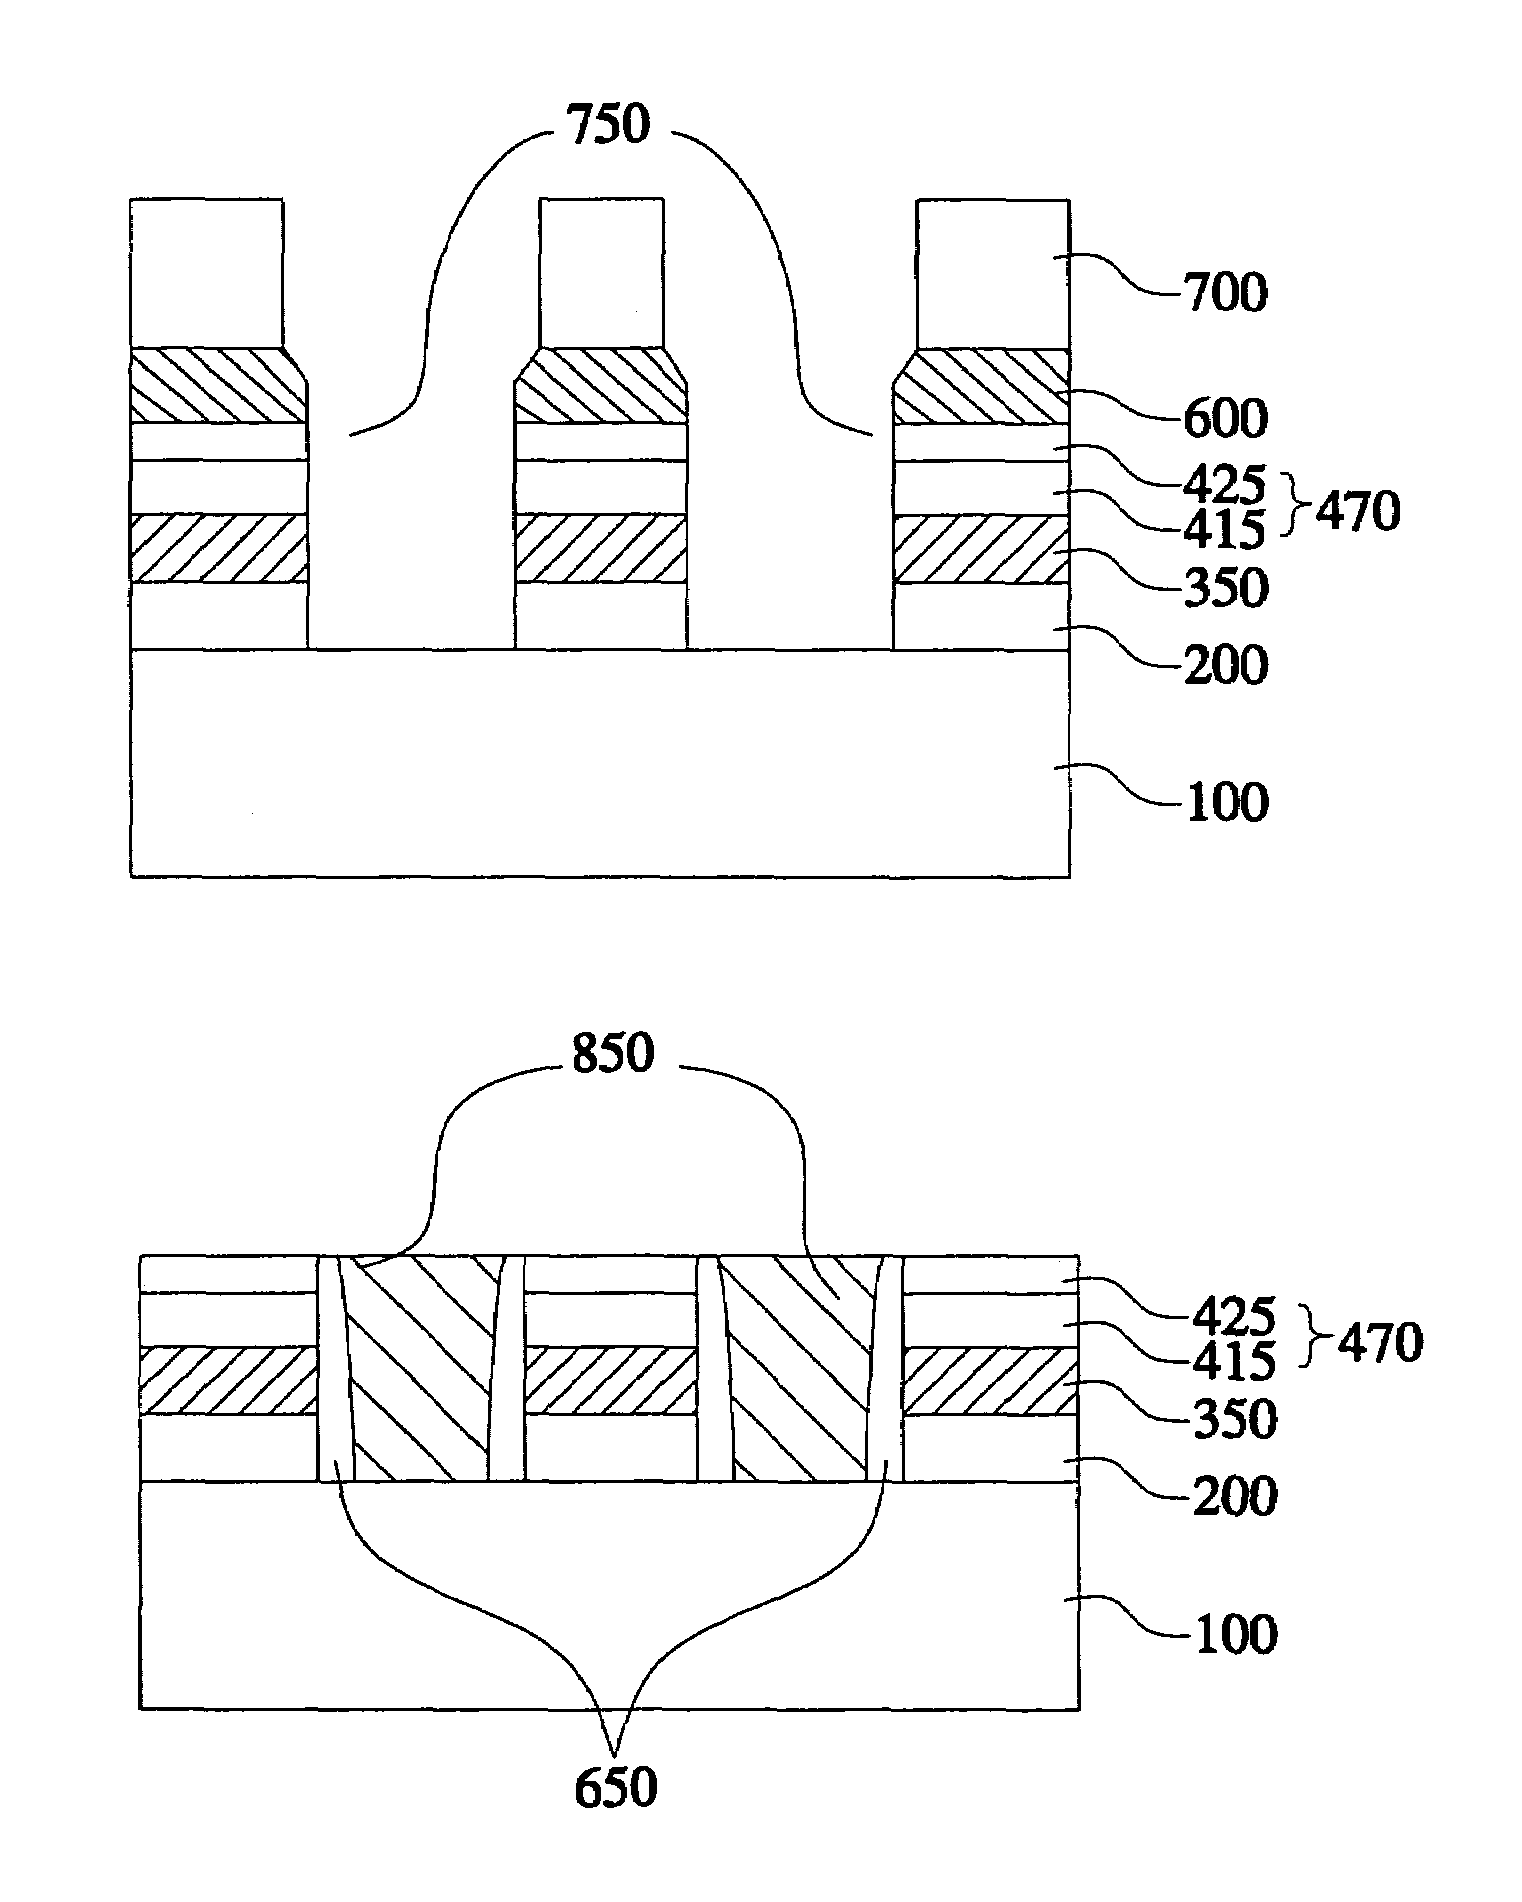 Method of forming a self-aligned contact structure using a sacrificial mask layer